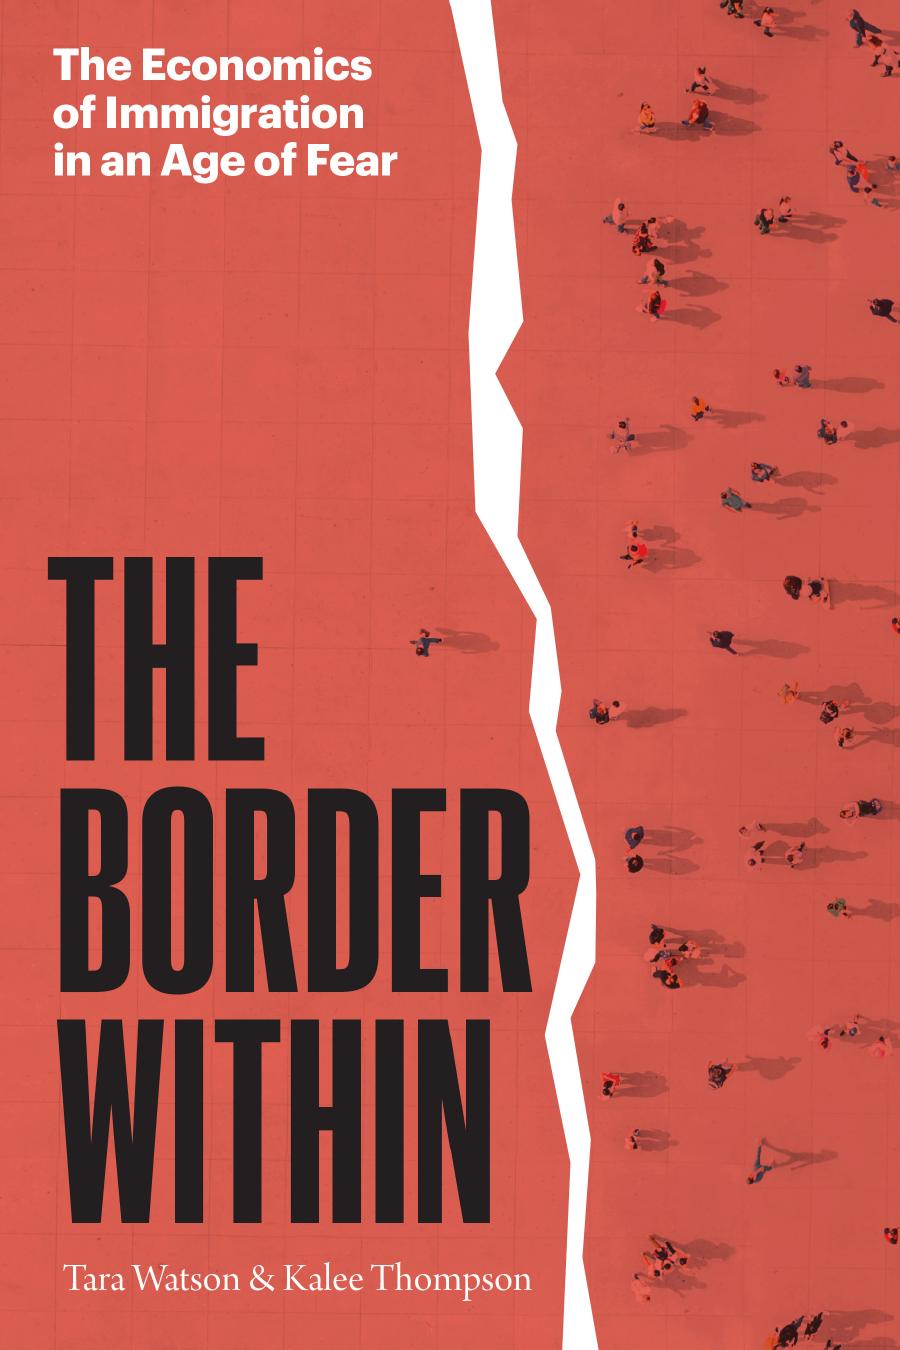 The Border Within: The Economics of Immigration in an Age of Fear by Tara Watson & Kalee Thompson